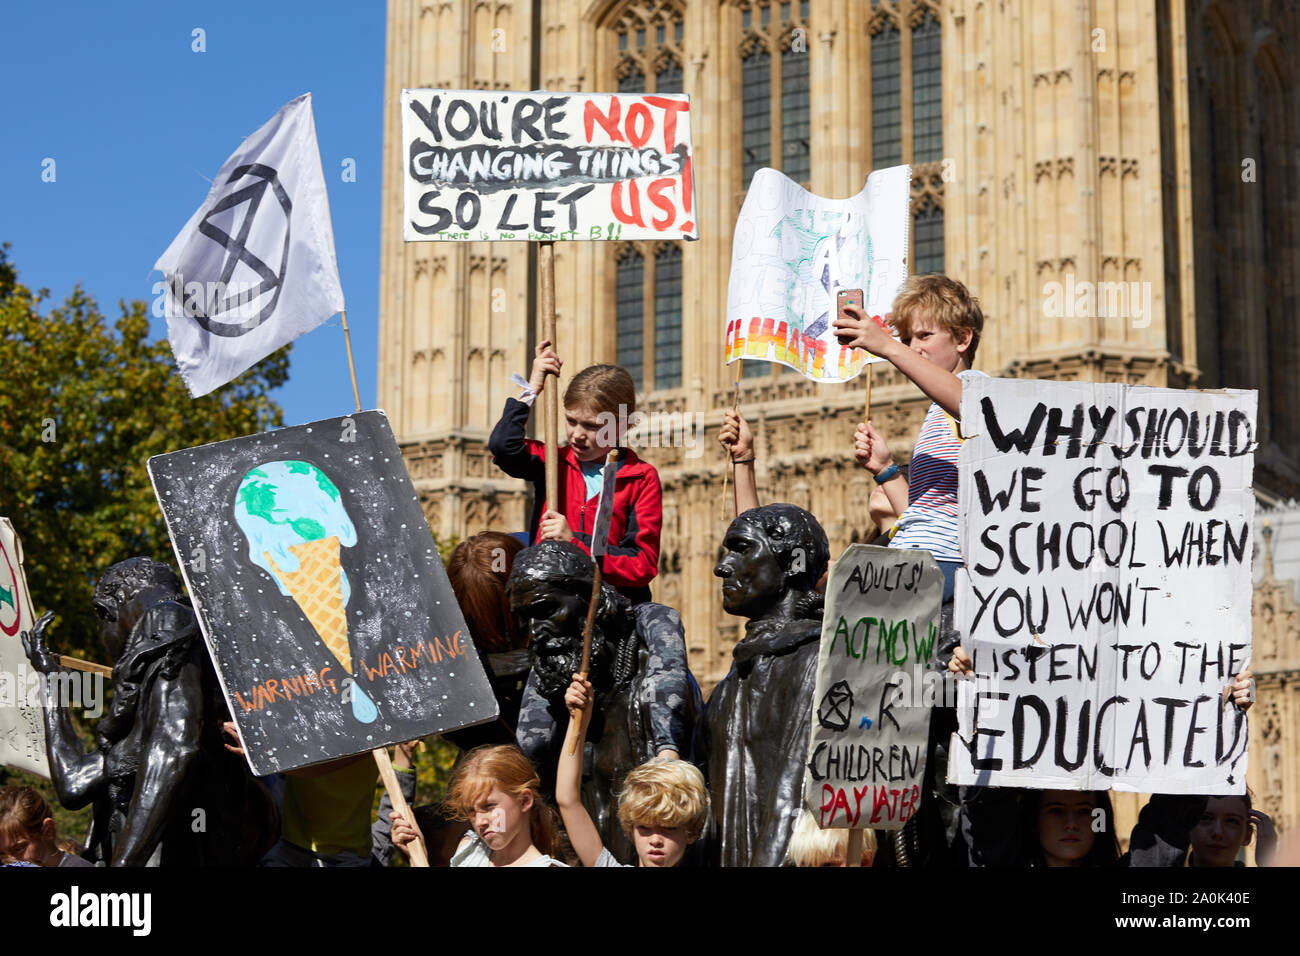 London, U.K. - Sept 20, 2019: Protestors in Westminster as part of the Youth Strike 4 Climate worldwide demonstration. Stock Photo